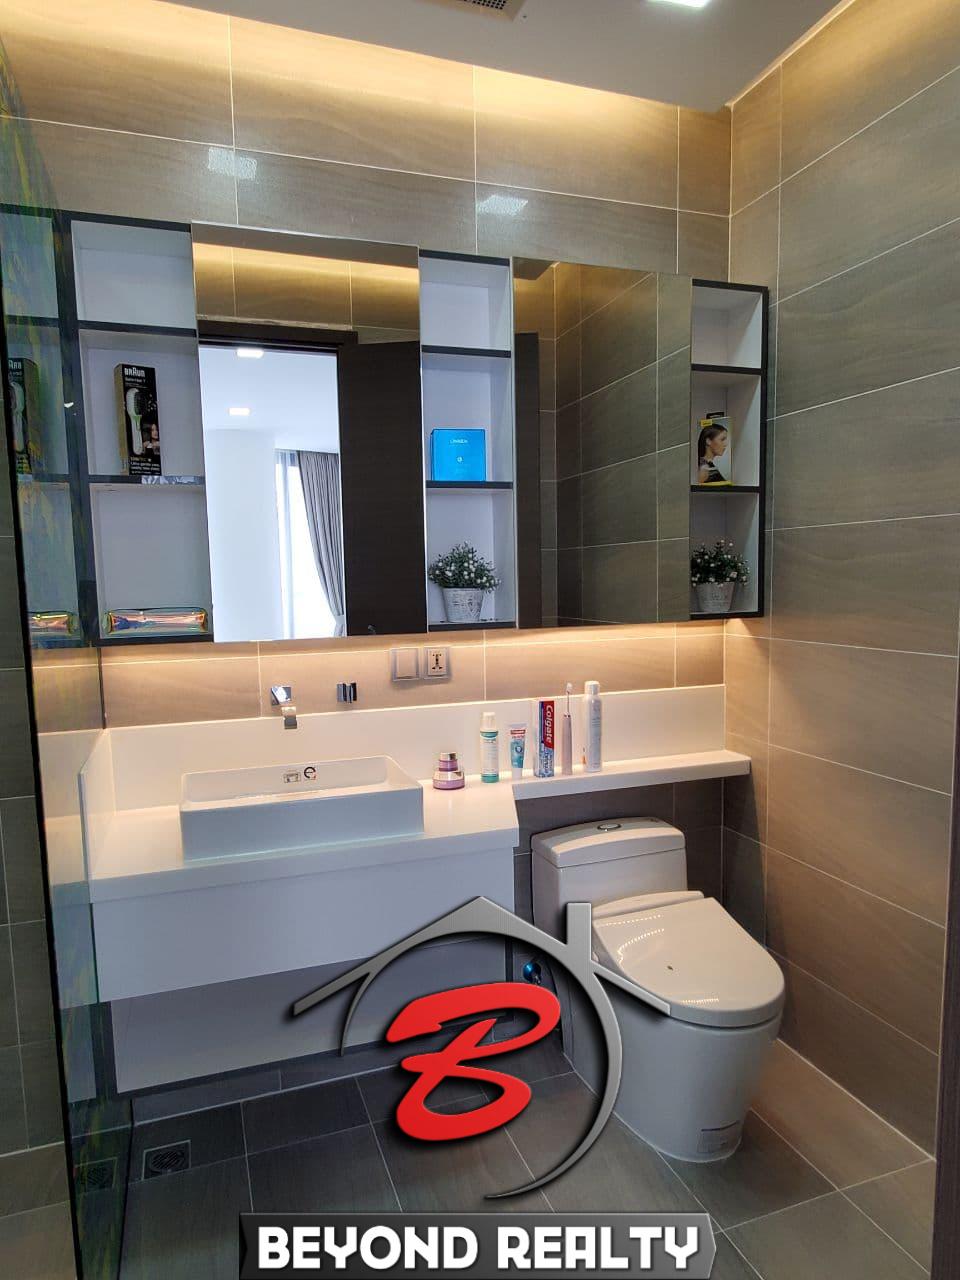 the bathroom of the luxury serviced apartment at BKK1 in Phnom Penh Cambodia